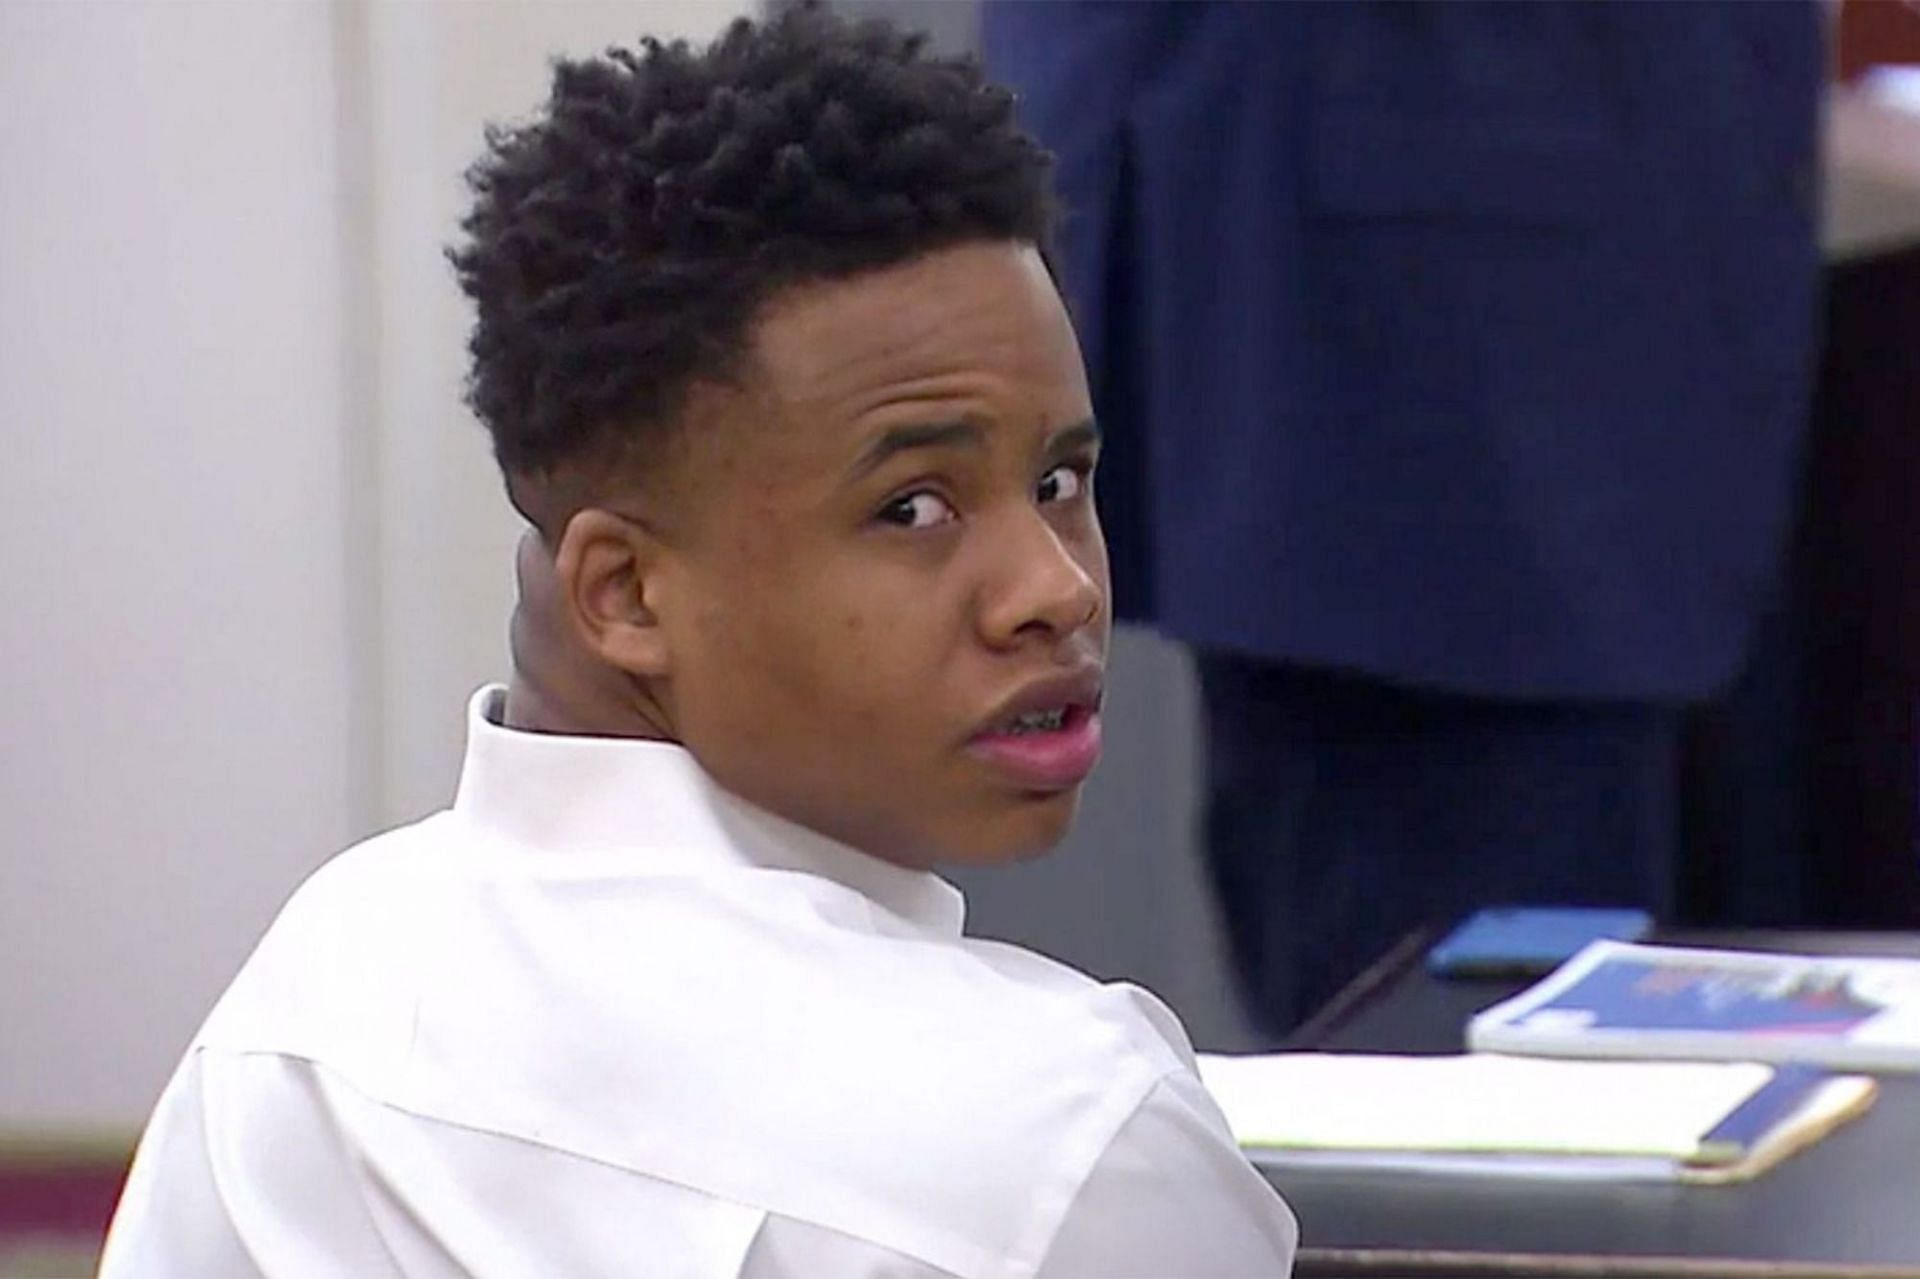 Rapper Tay K claims he would have a shorter prison sentence if he was a &quot;white kid&quot; (Image via NBCDFW)